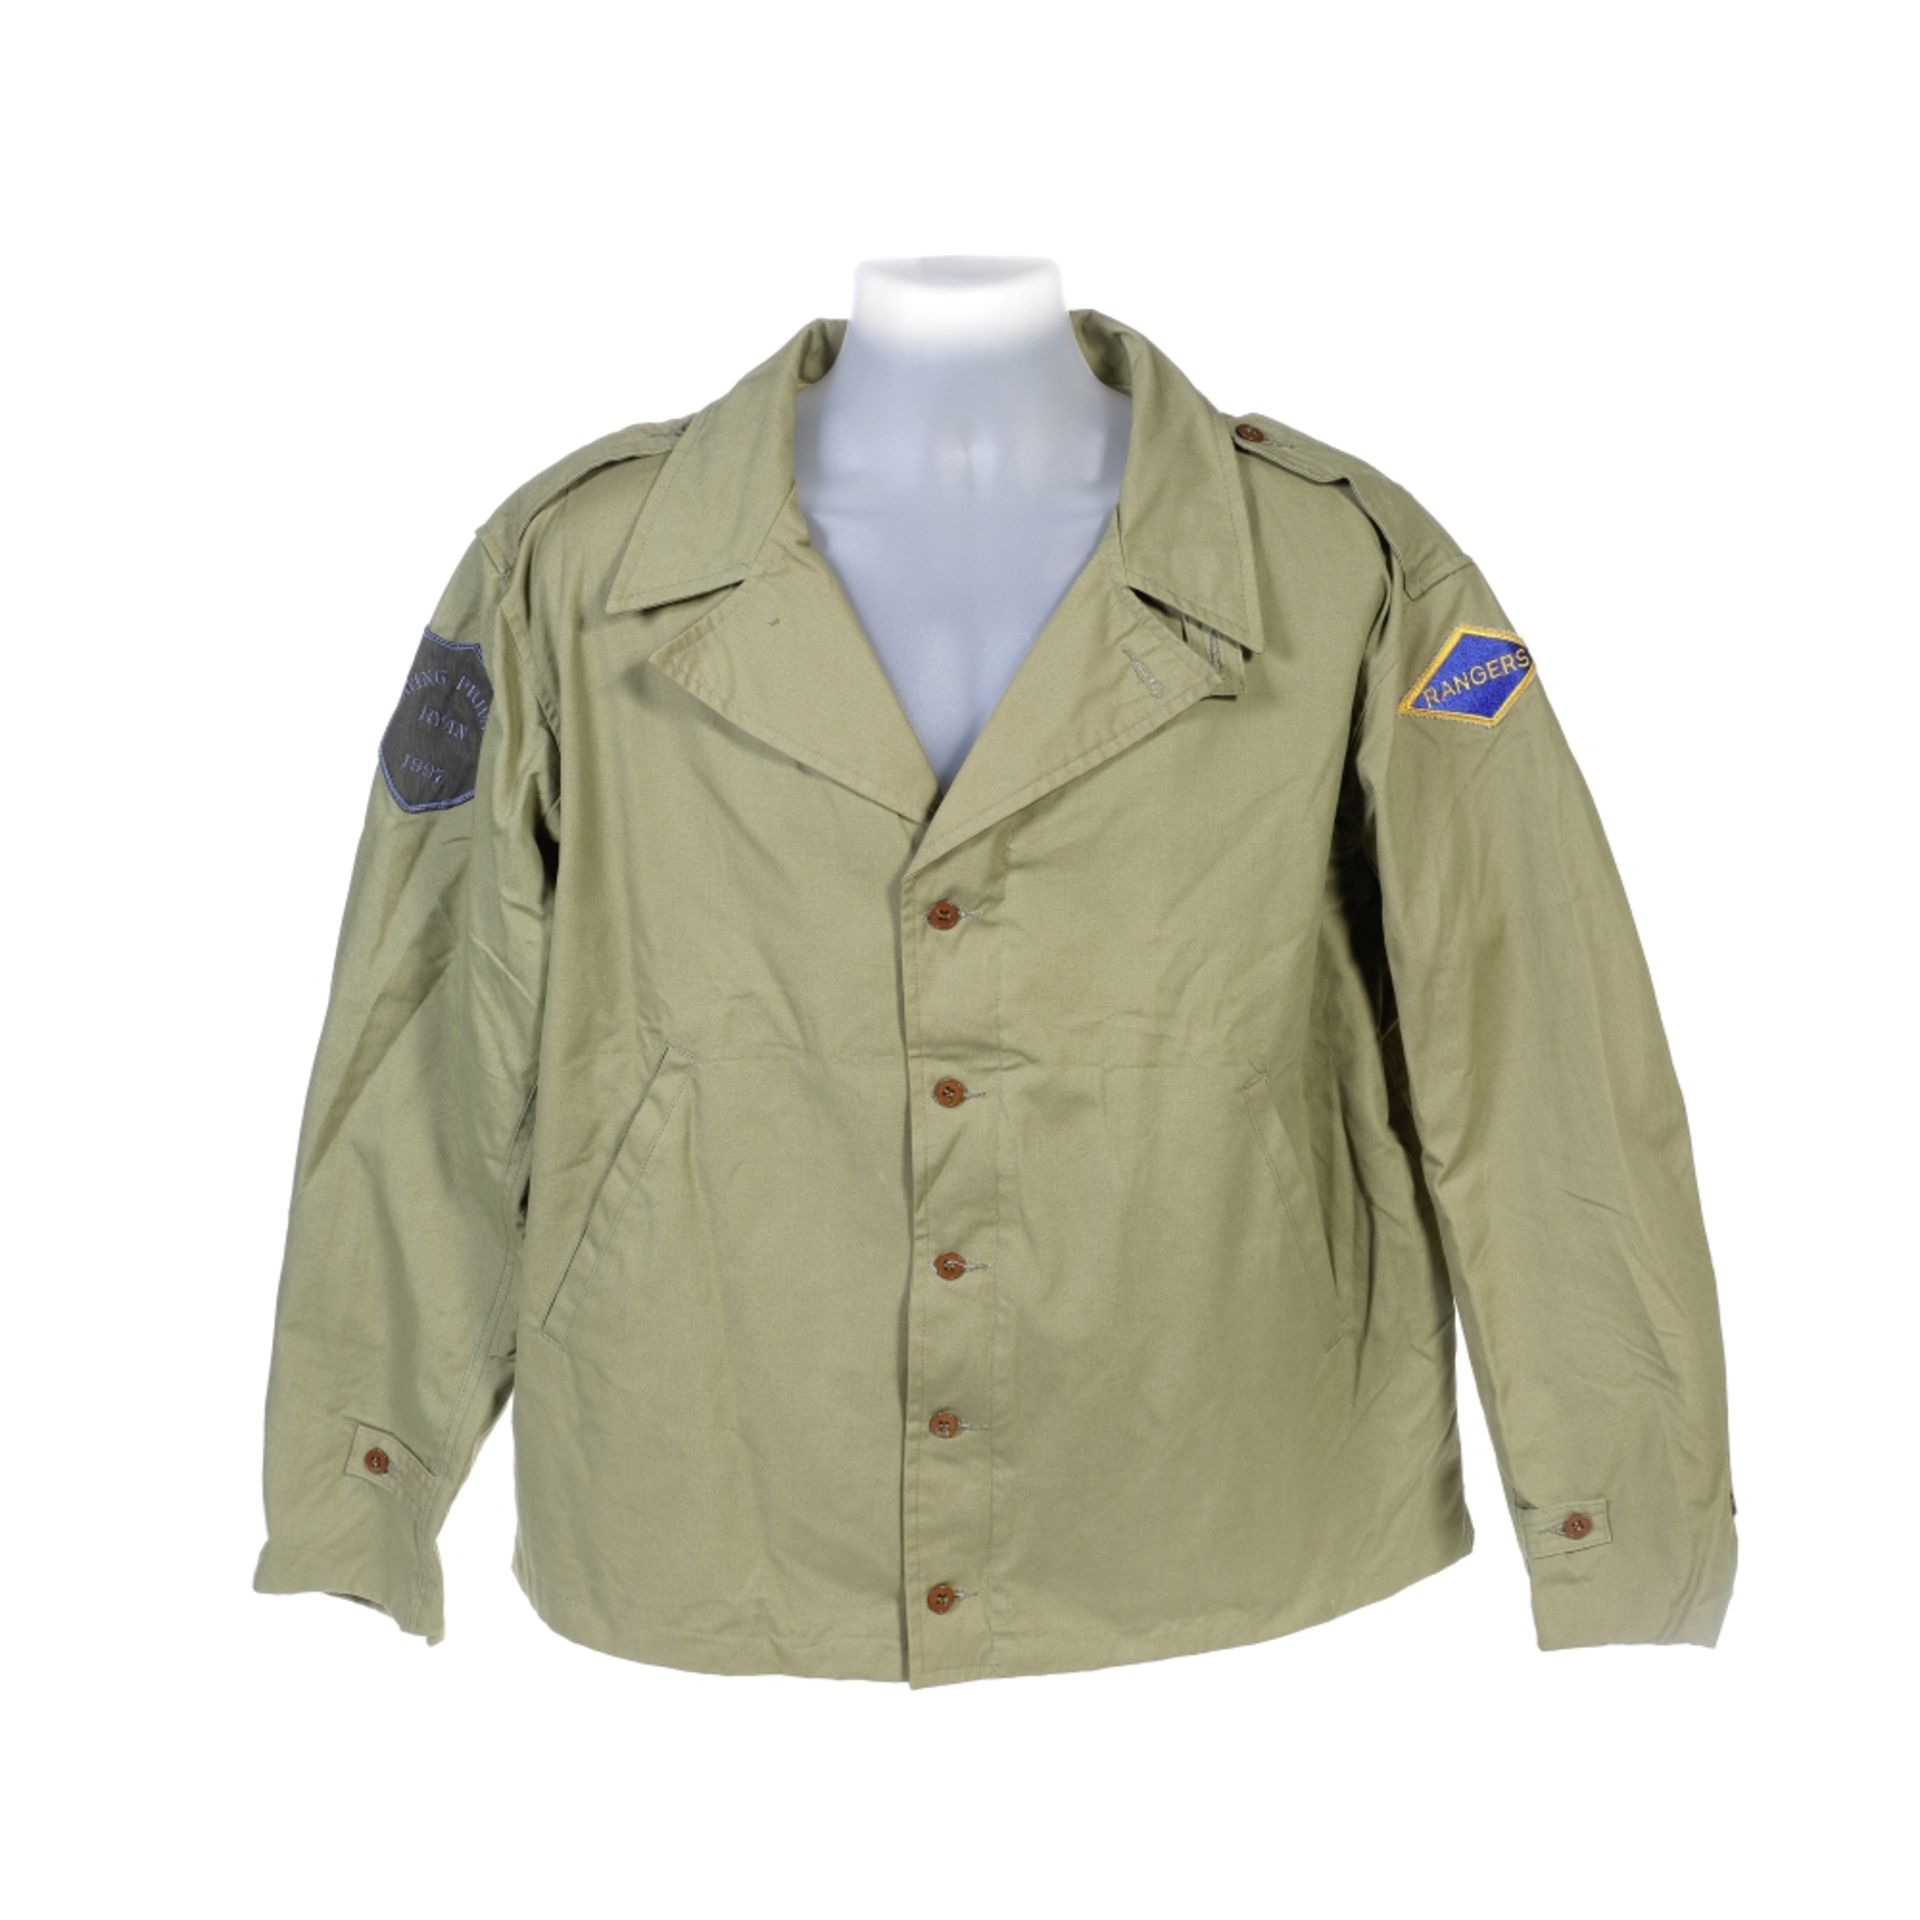 Saving Private Ryan: A Crew Ranger Jacket From The Production, Dreamworks / Paramount Pictures, 1...